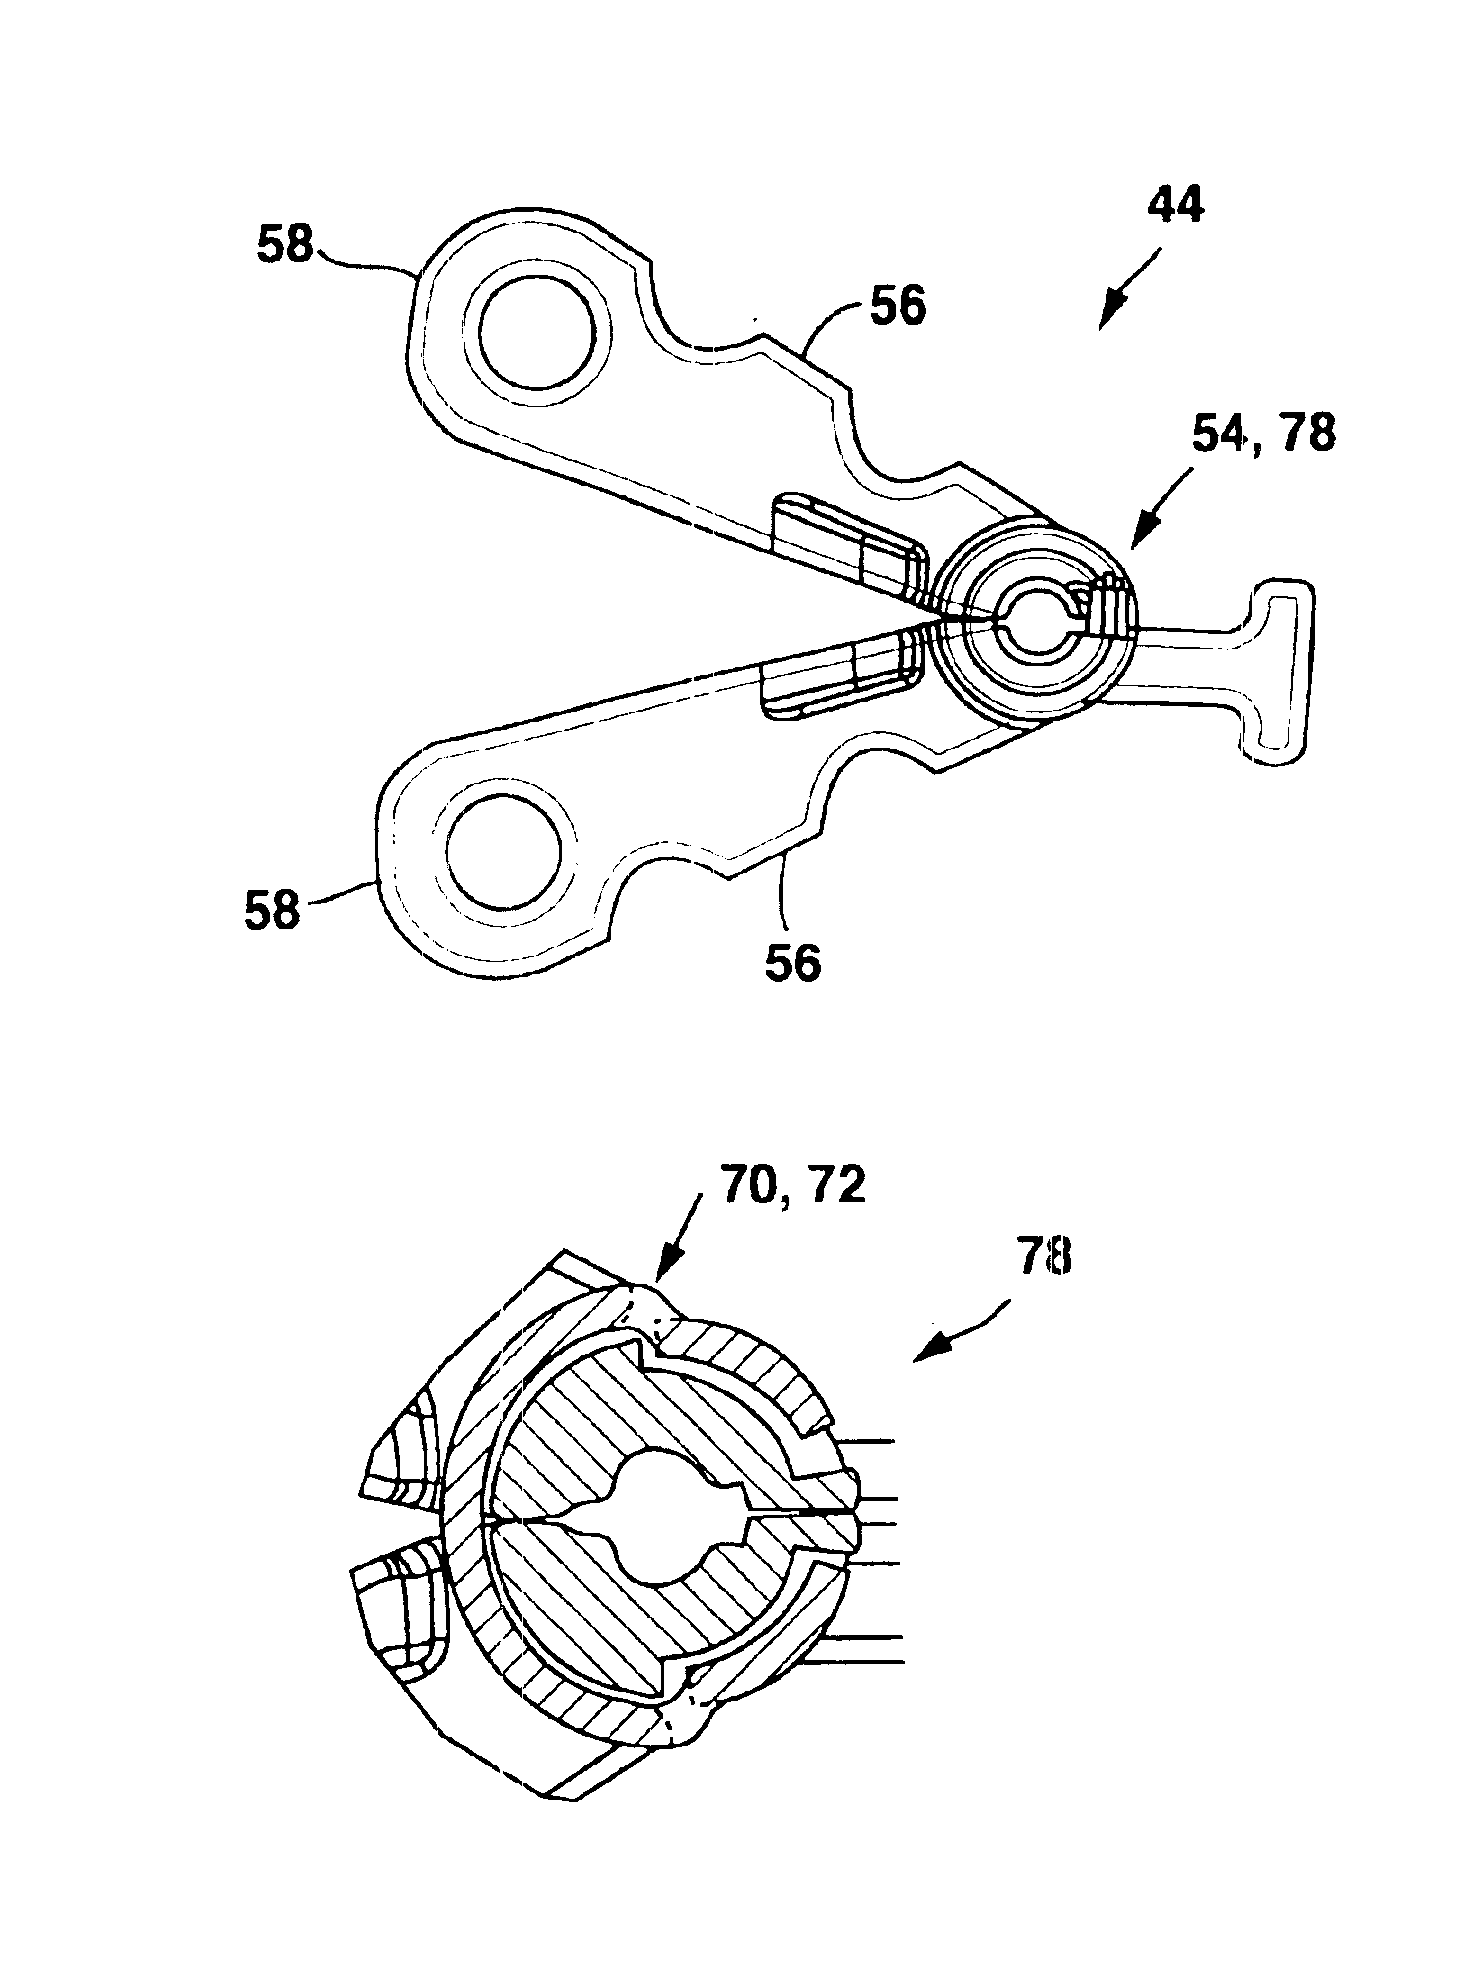 Implantable therapy delivery element adjustable anchor